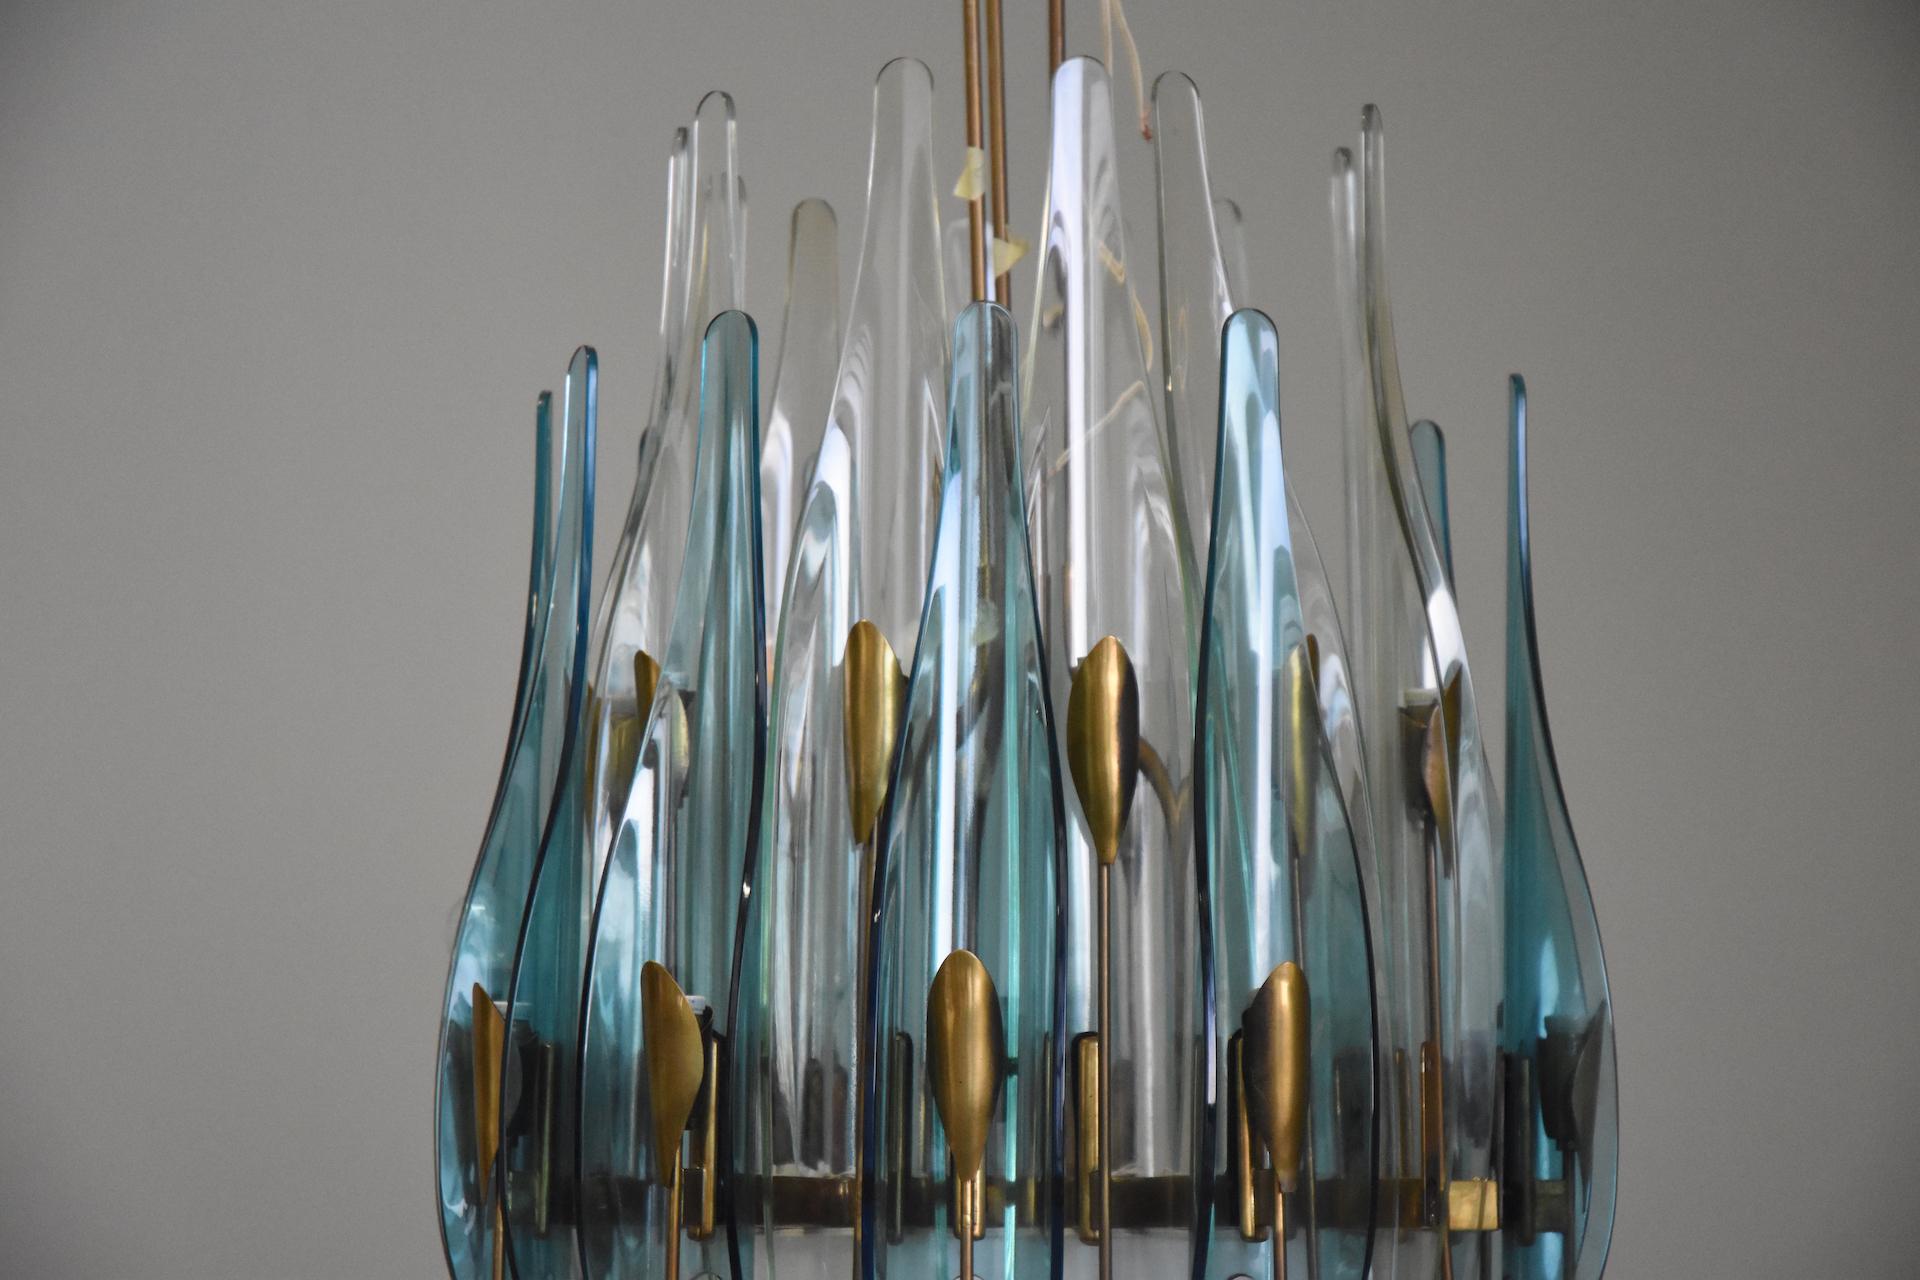 Rare beautiful 24-light Dahlia chandelier designed by Max Ingrand, made in Milan, 1954 by Fontana Arte.
light blue and light shades arranged vertically in curved glass and cut on  brass frame, great quality. 
Really one of the most beautiful